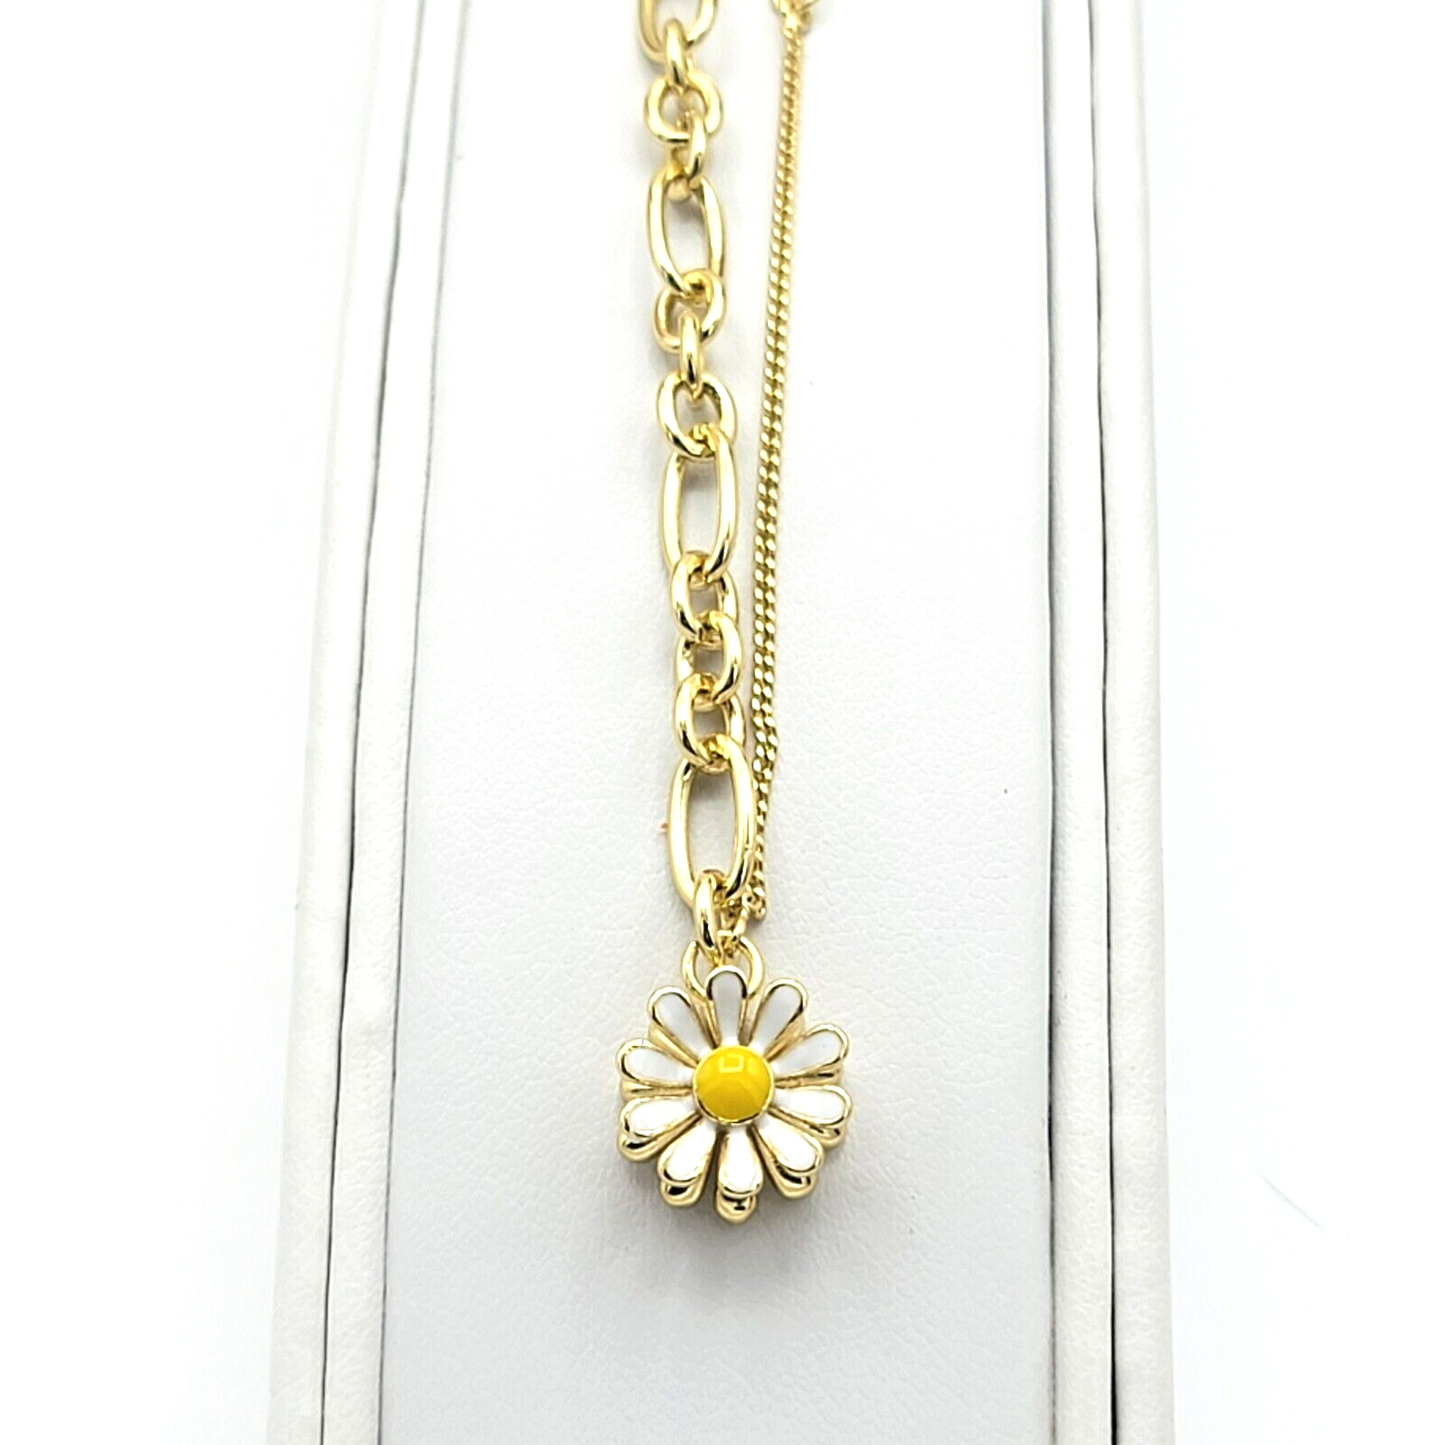 Necklaces - 14K Gold Plated. White Daisy Flower Charm Pendant Fancy Chain Necklace